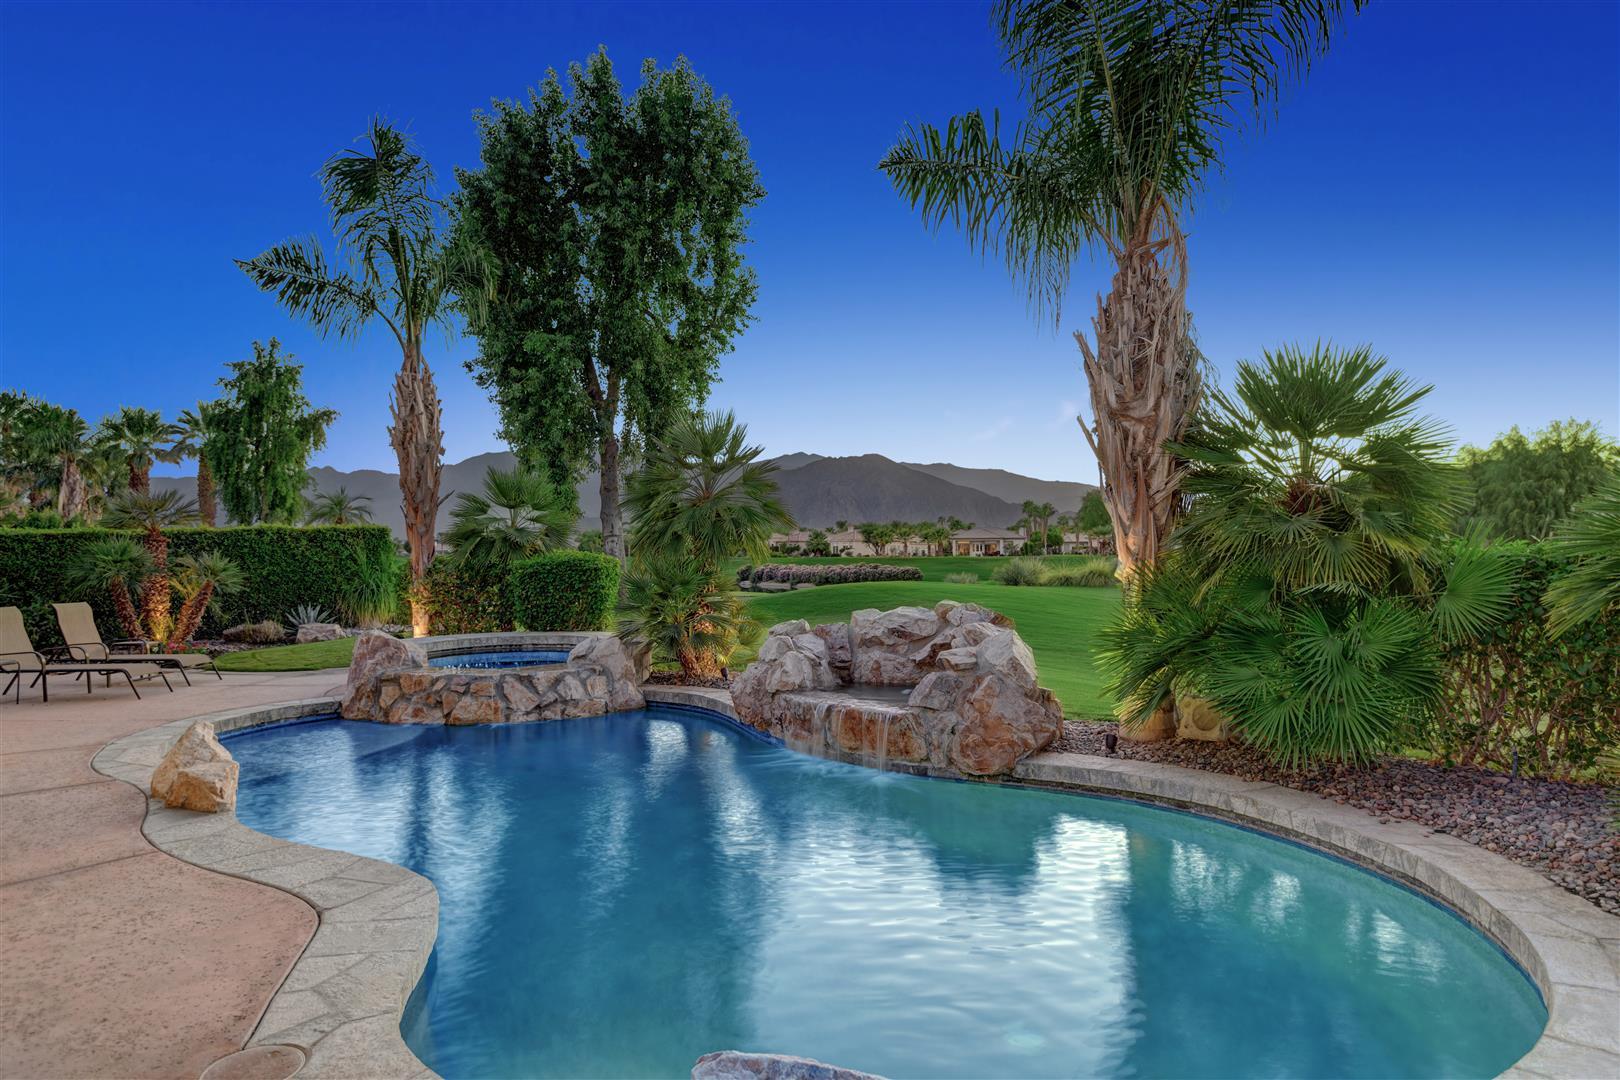 POOL AND SPA TO FAIRWAY AND MOUNTAINS NI